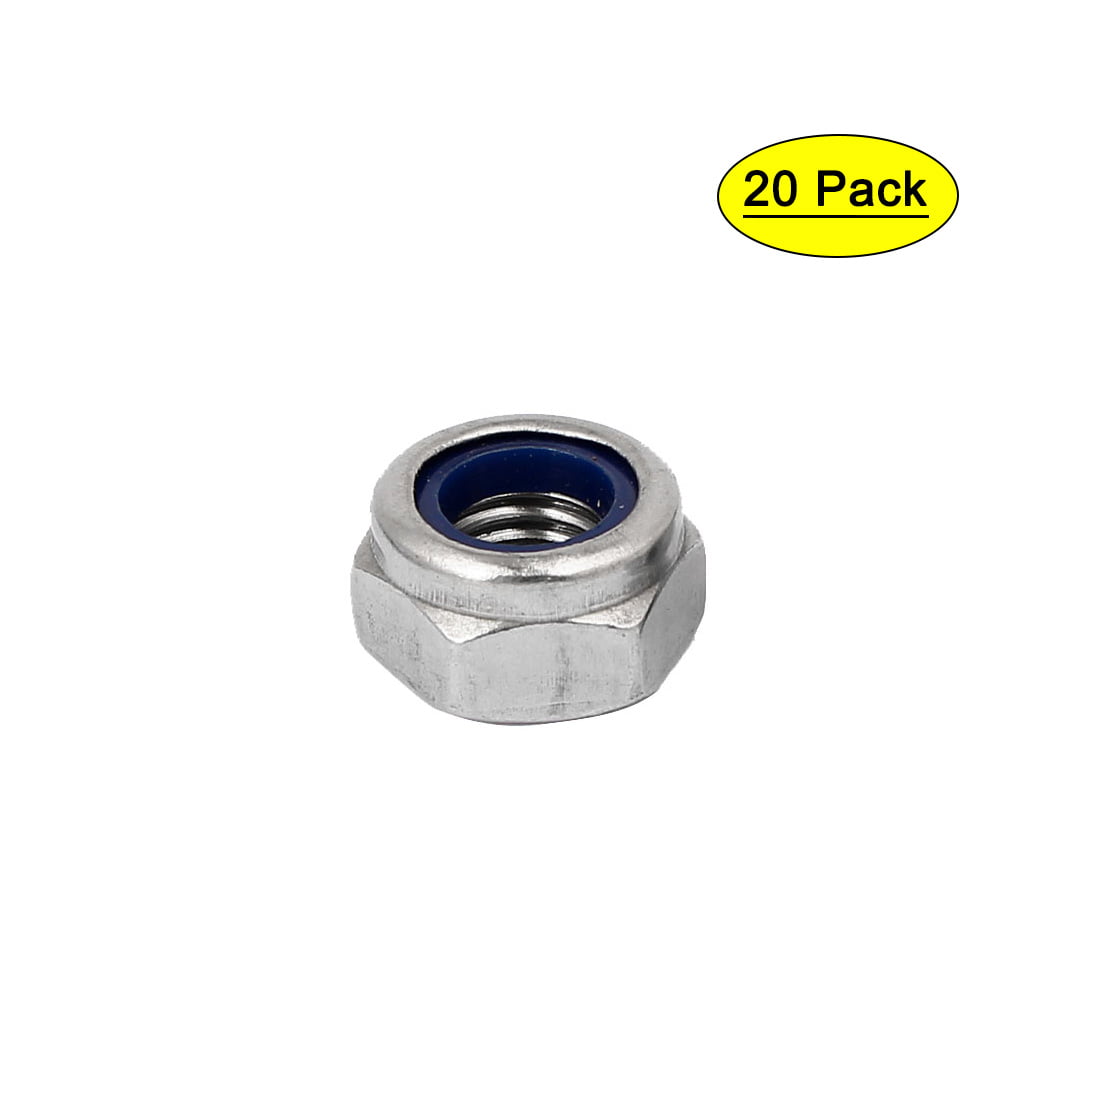 Plain Finish uxcell M8 x 1.25mm Nylon Insert Hex Lock Nuts Pack of 25 304 Stainless Steel 